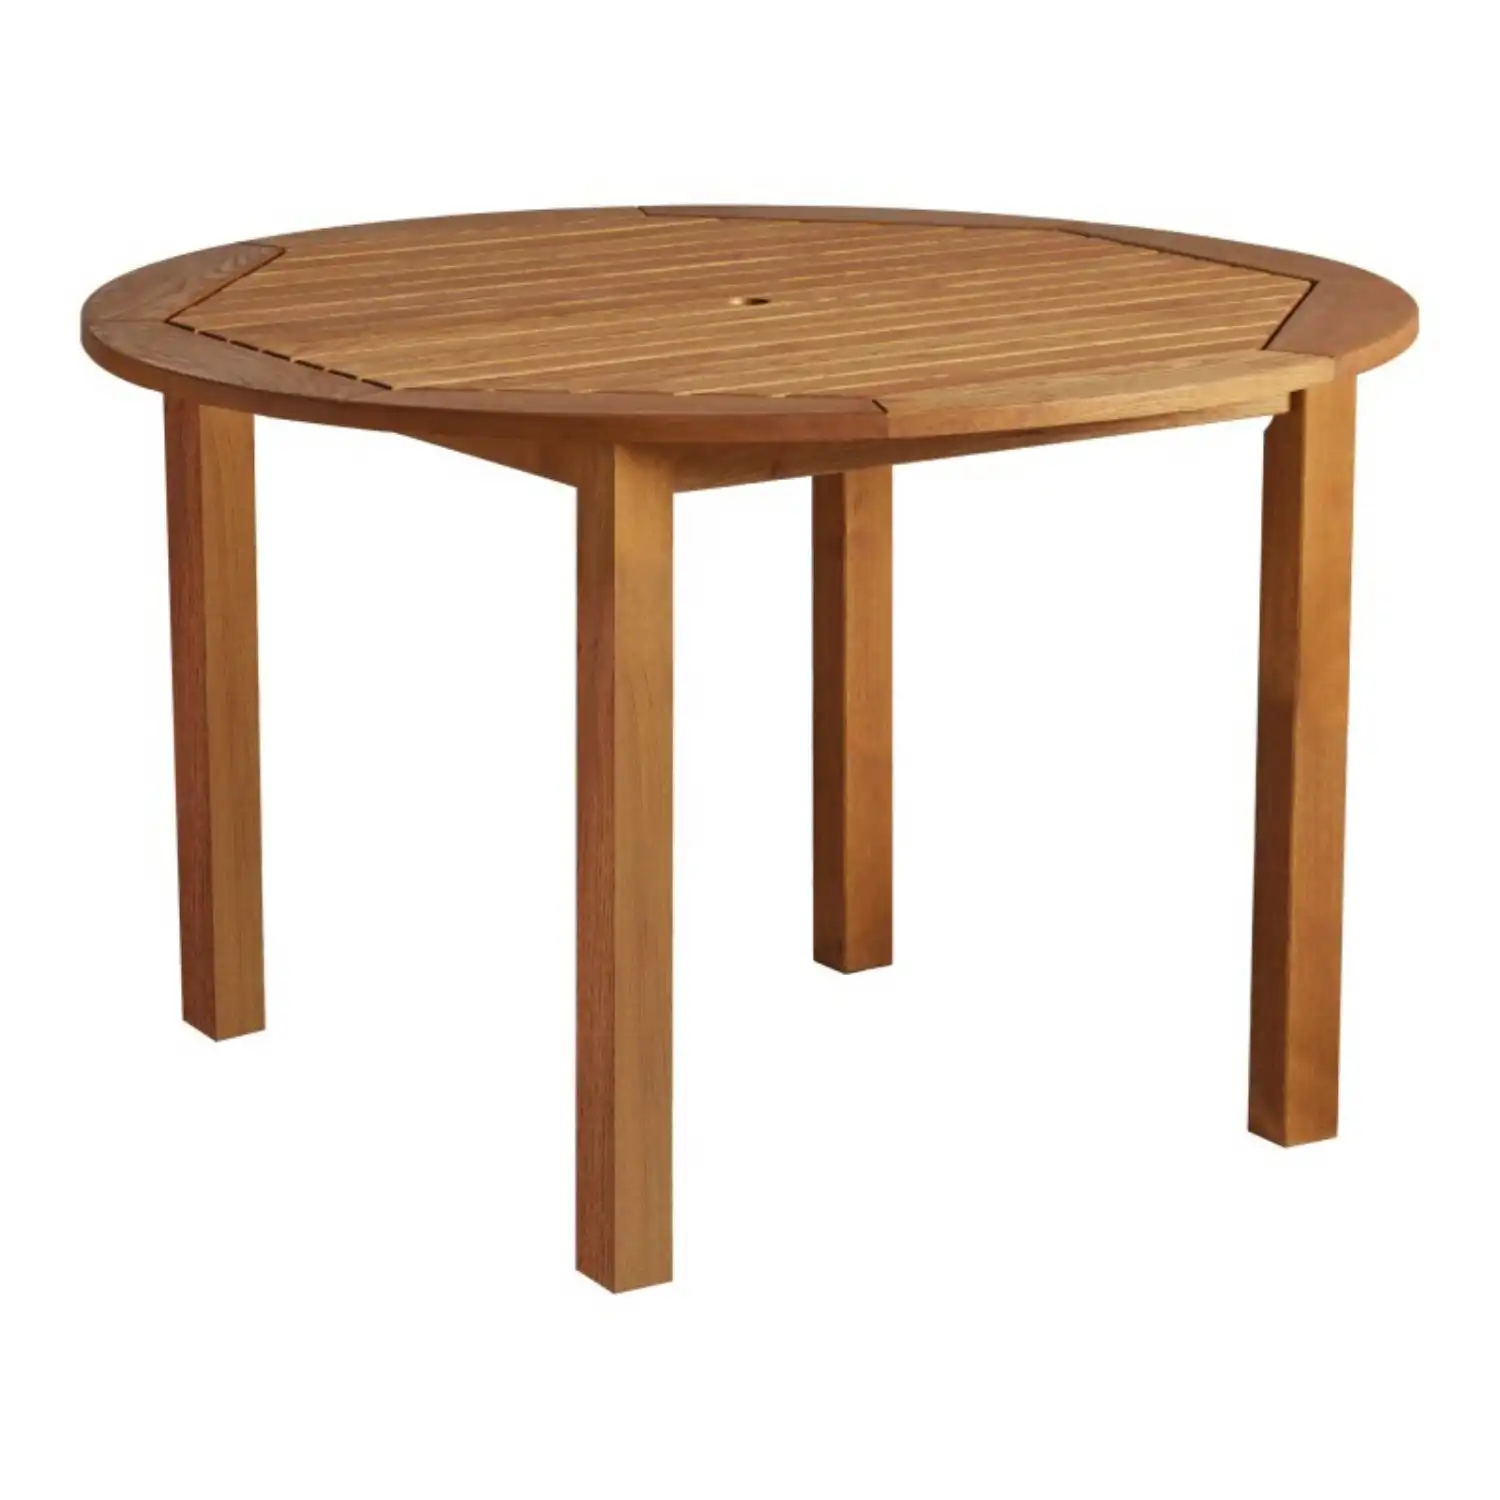 Outdoor 120cm Round Dining Table in Robinia Wood